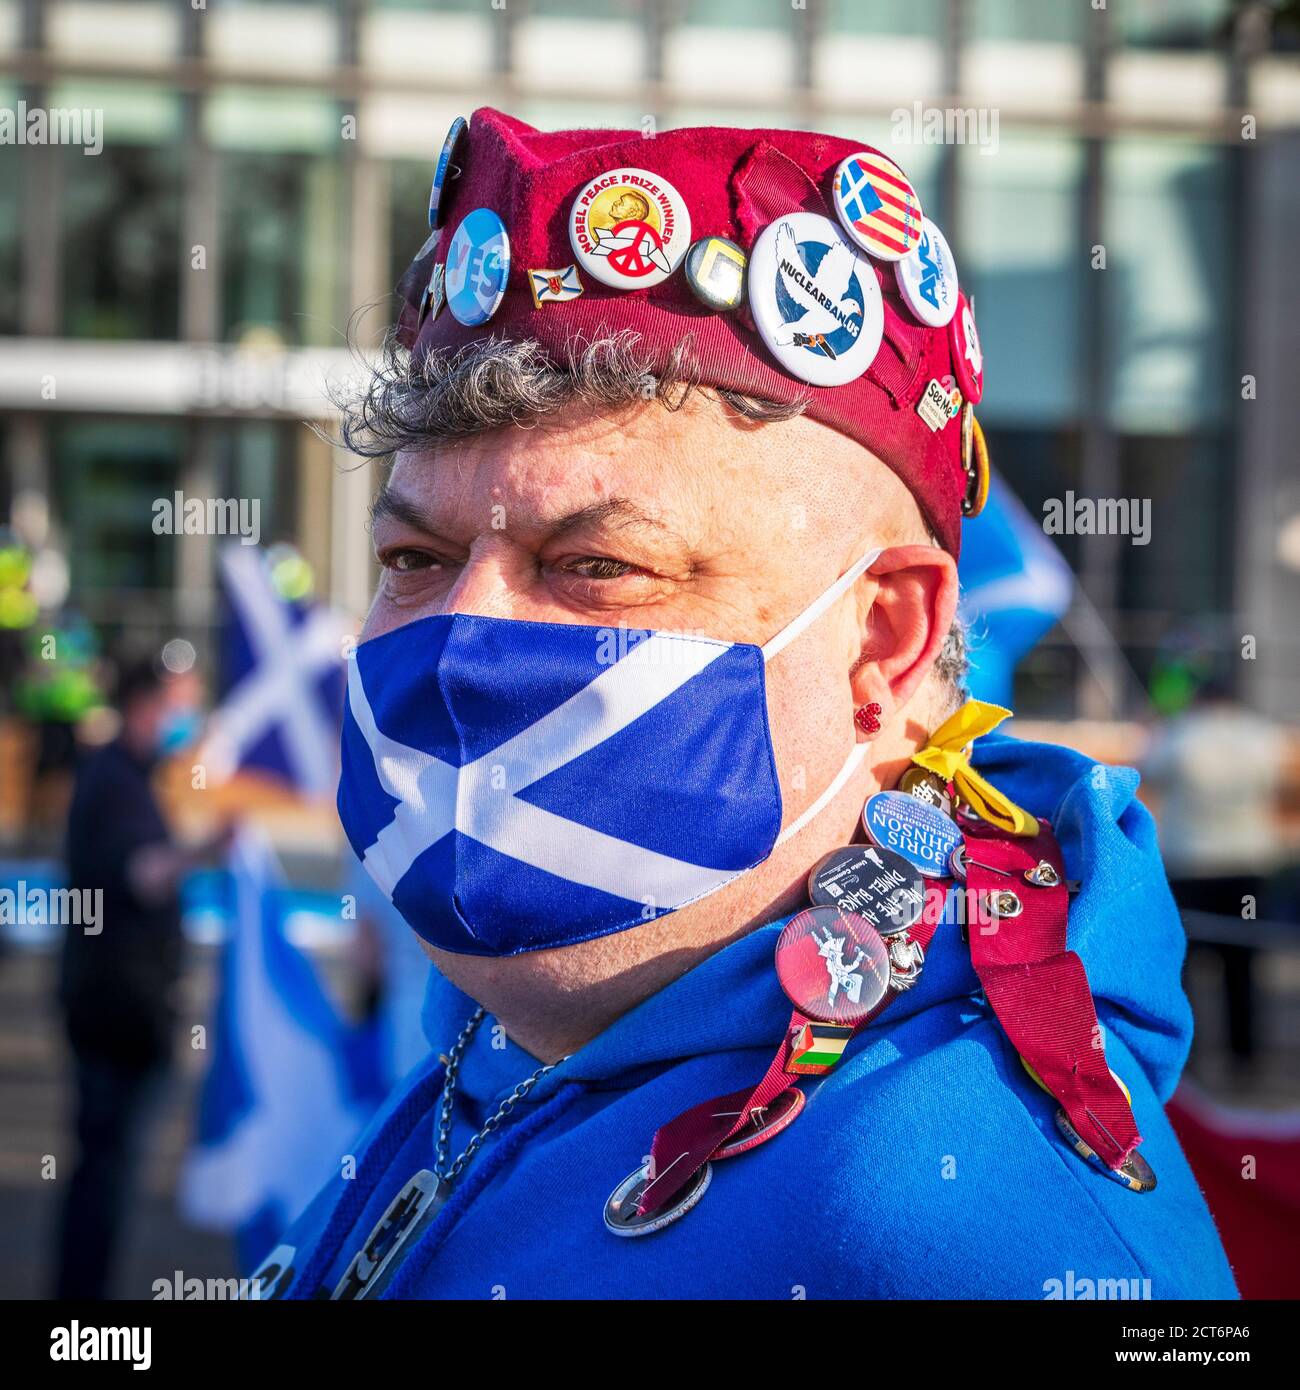 Scottish Independence supporter wearing a saltire face mask a glengarry beret with pro independence badges, Taken at an independence political rally, Stock Photo